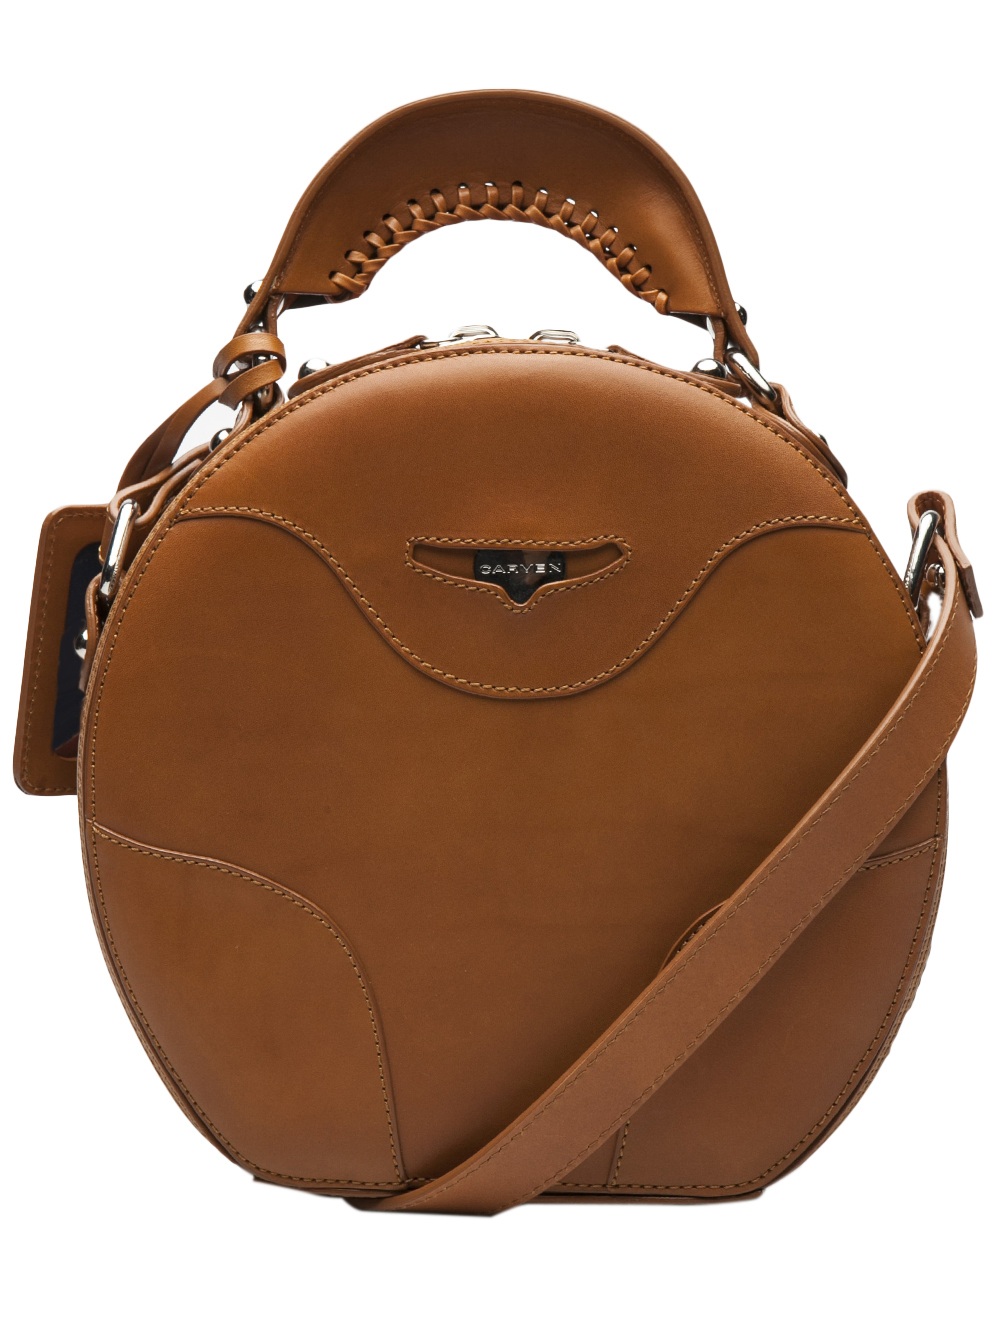 Carven Round Leather Bag in Brown | Lyst